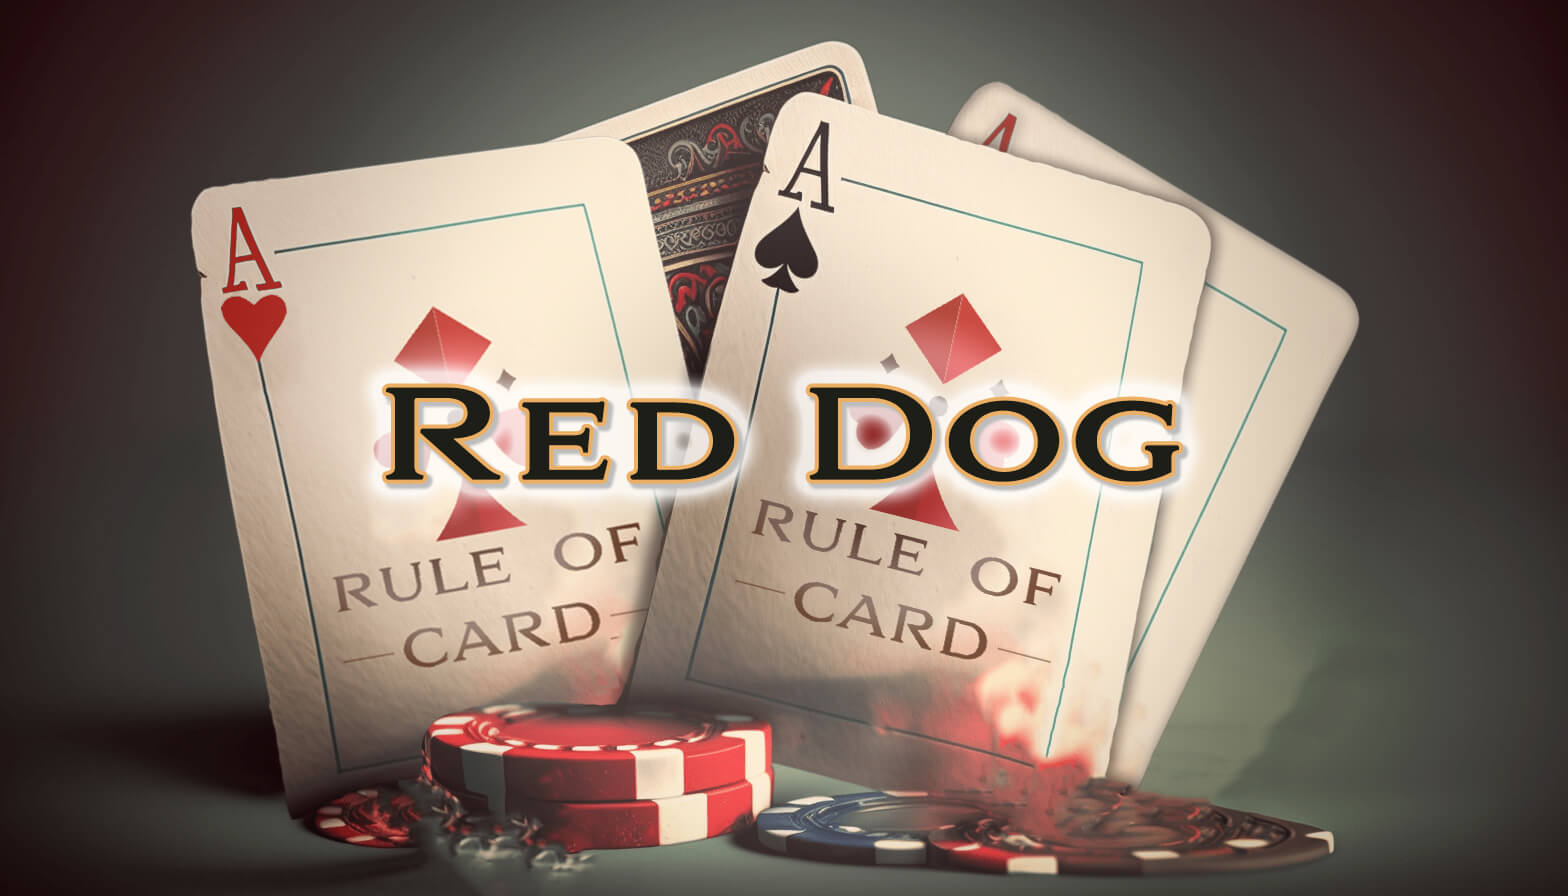 Playing the card game Red Dog